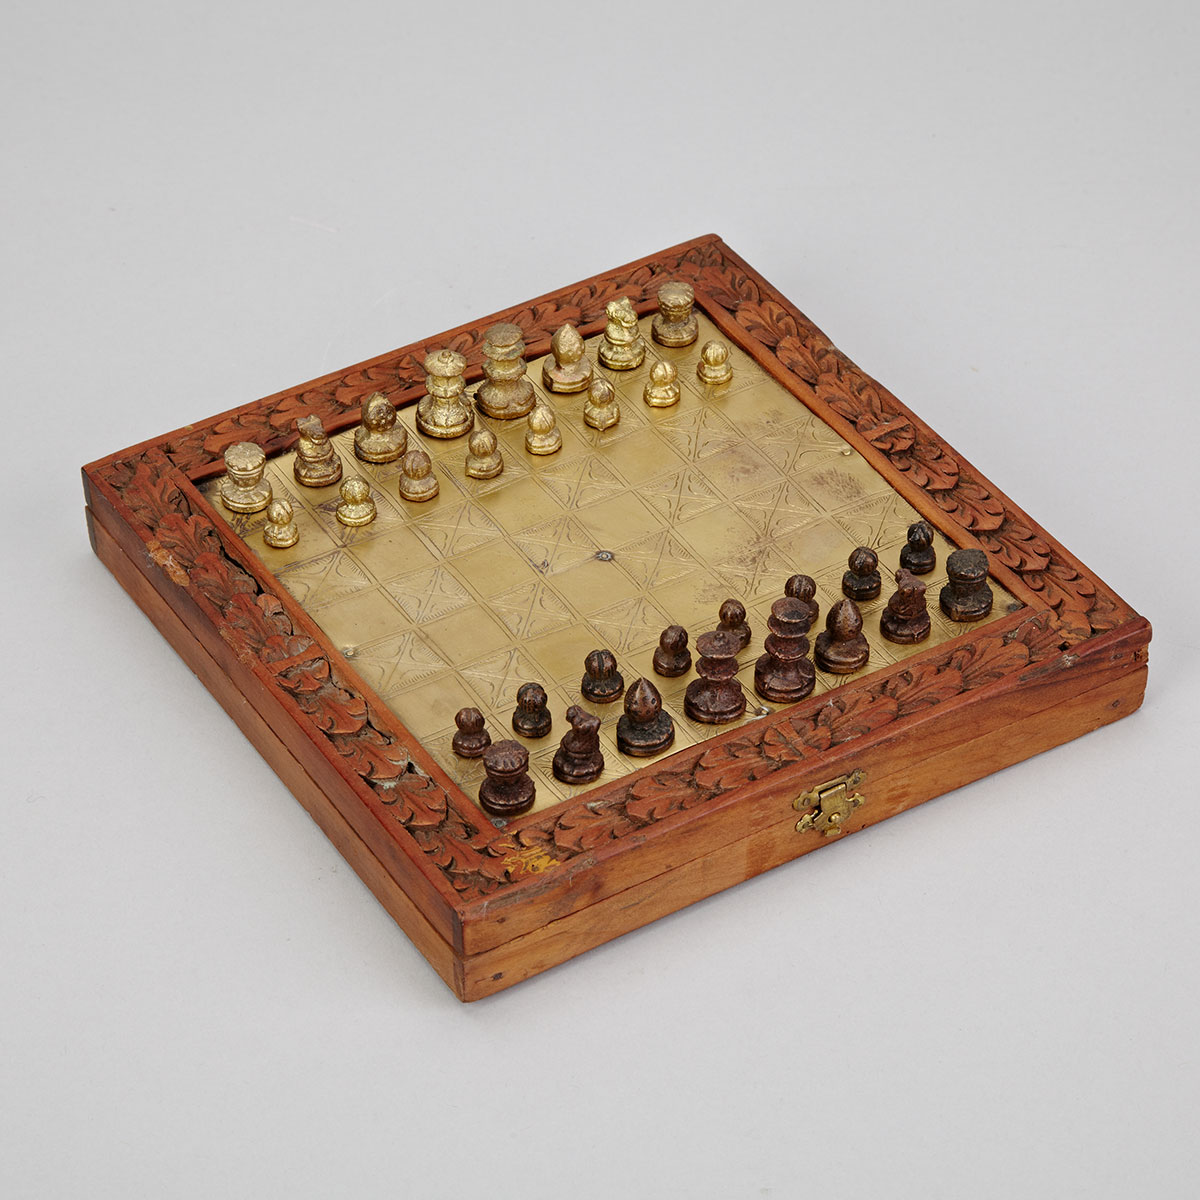 Myanmar (Burmese) Travelling Gilt and Patinated Bronze Chess Set, mid 20th century